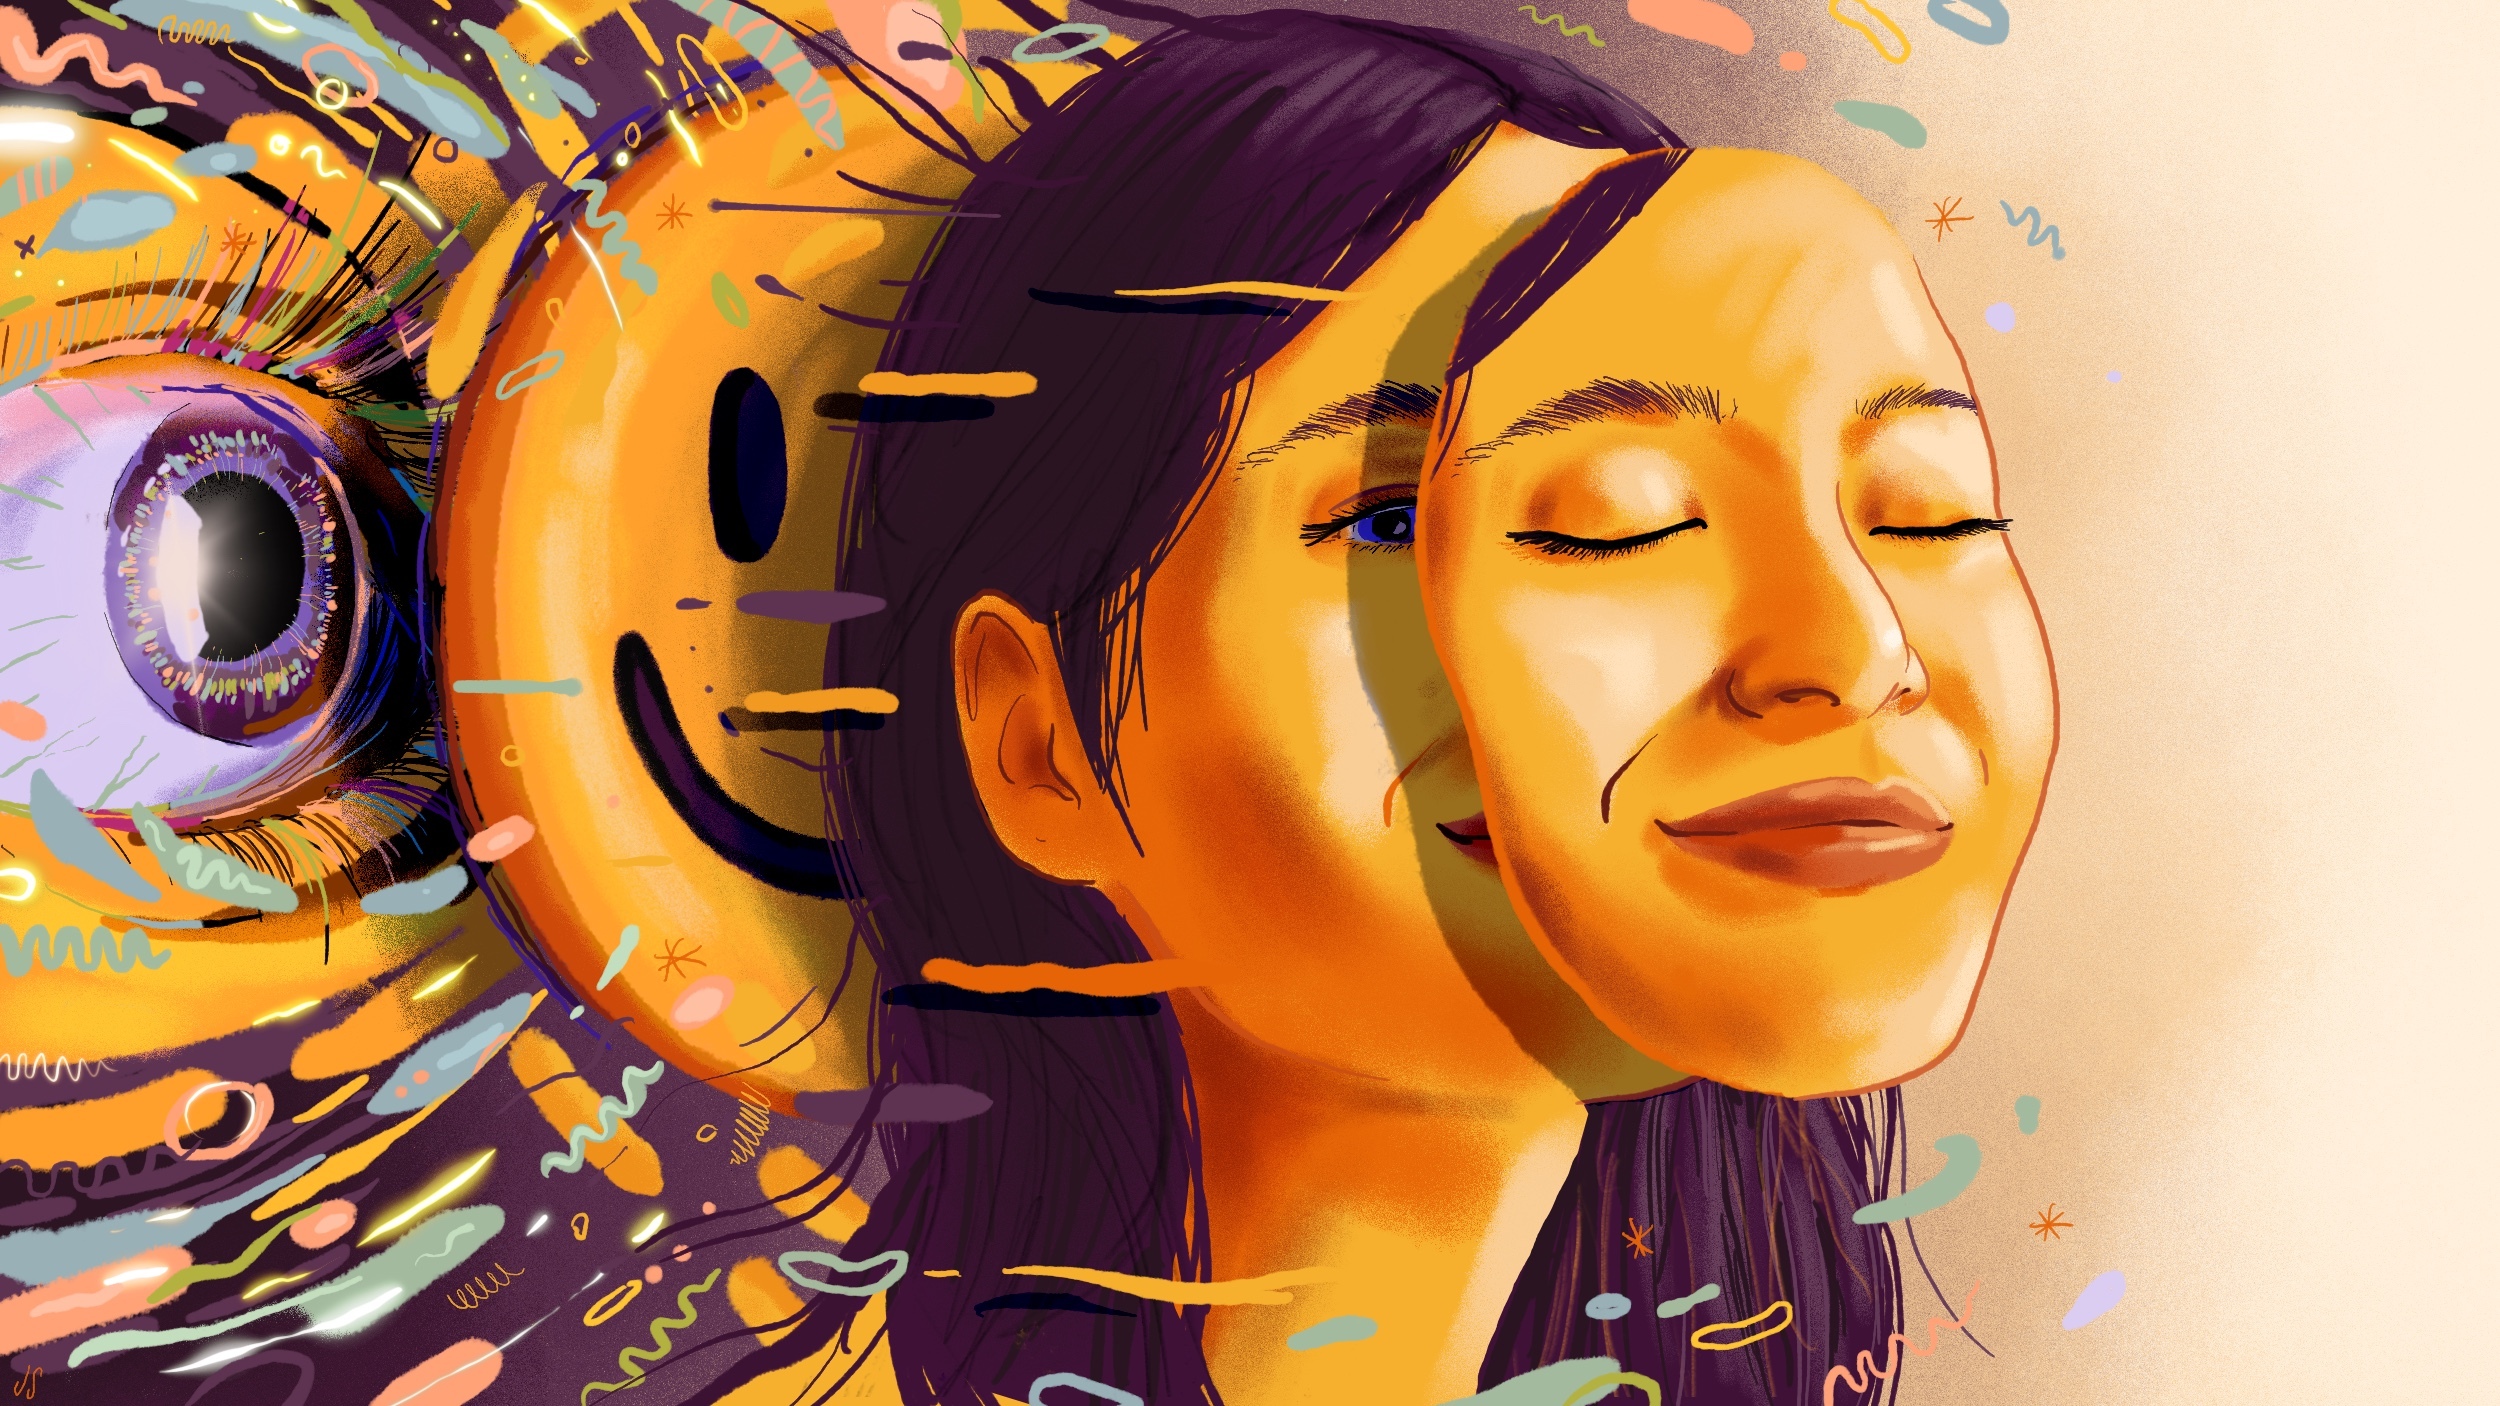 Illustration of a young woman with closed eyes, smiling, next to a large, detailed eye and surrounded by vibrant, abstract elements and smiley faces.